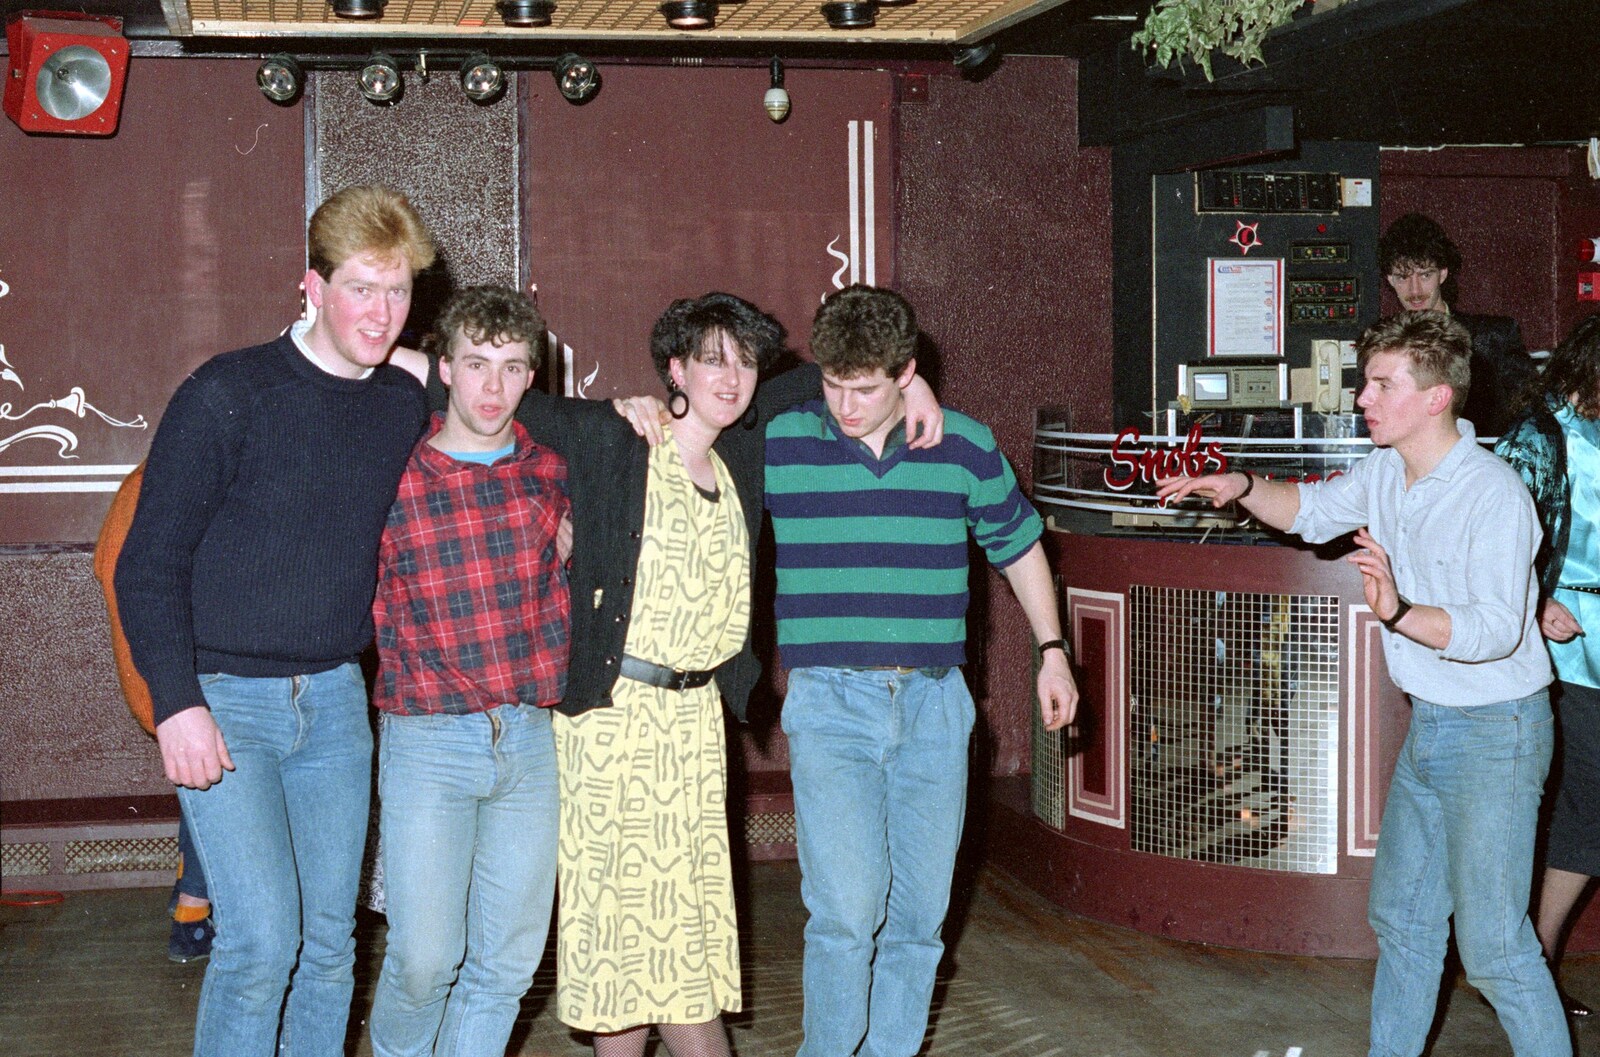 A photo on the dancefloor from Uni: A Party in Snobs Nightclub, Mayflower Street, Plymouth - 18th October 1986